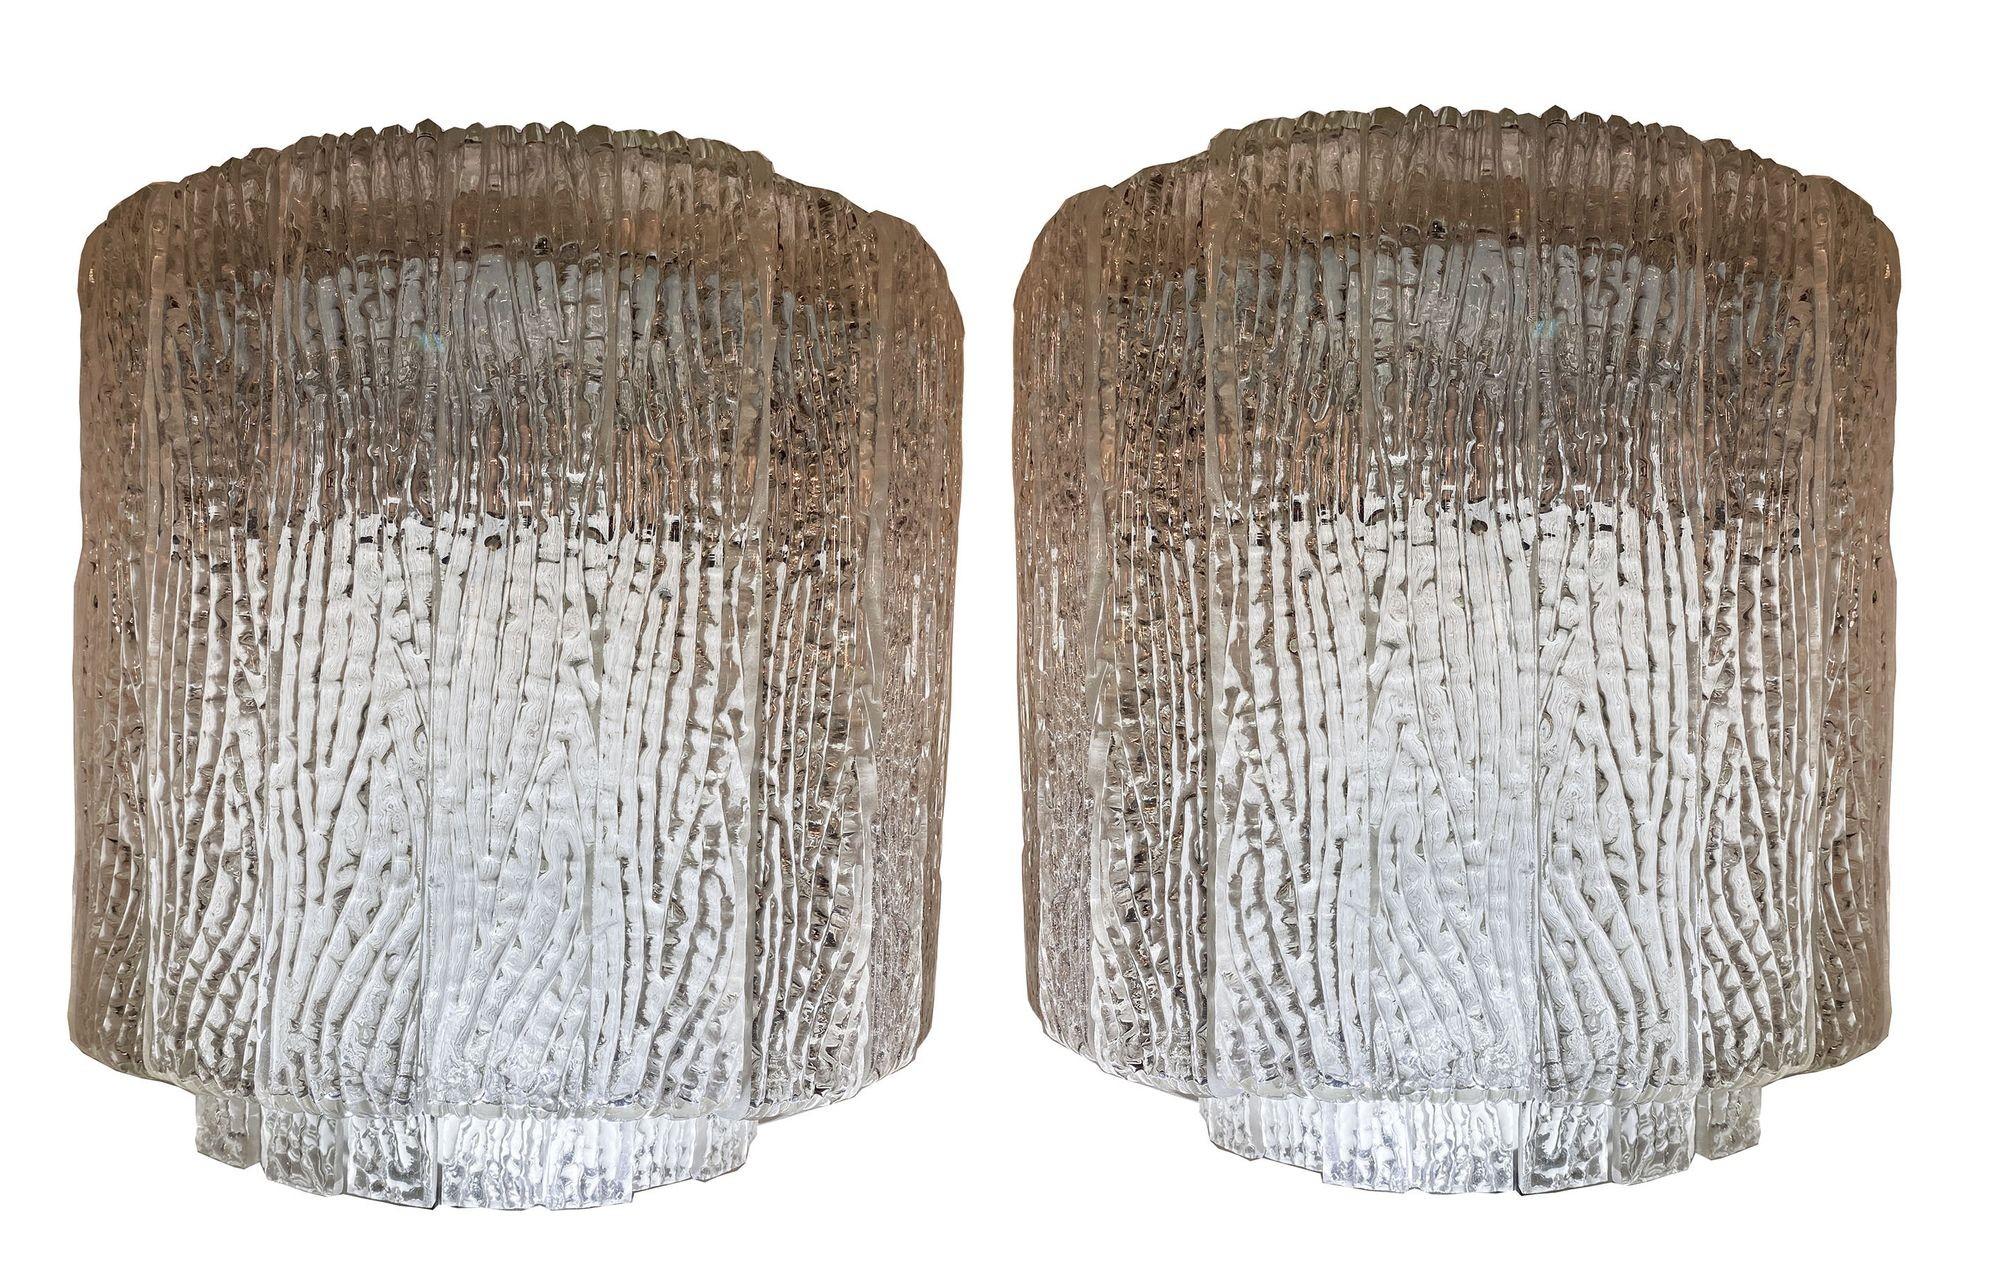 Pair of Italian Modern handblown glass sconces. Each with heavy mottled glass laid in semicircular form and in two tiers of glass.